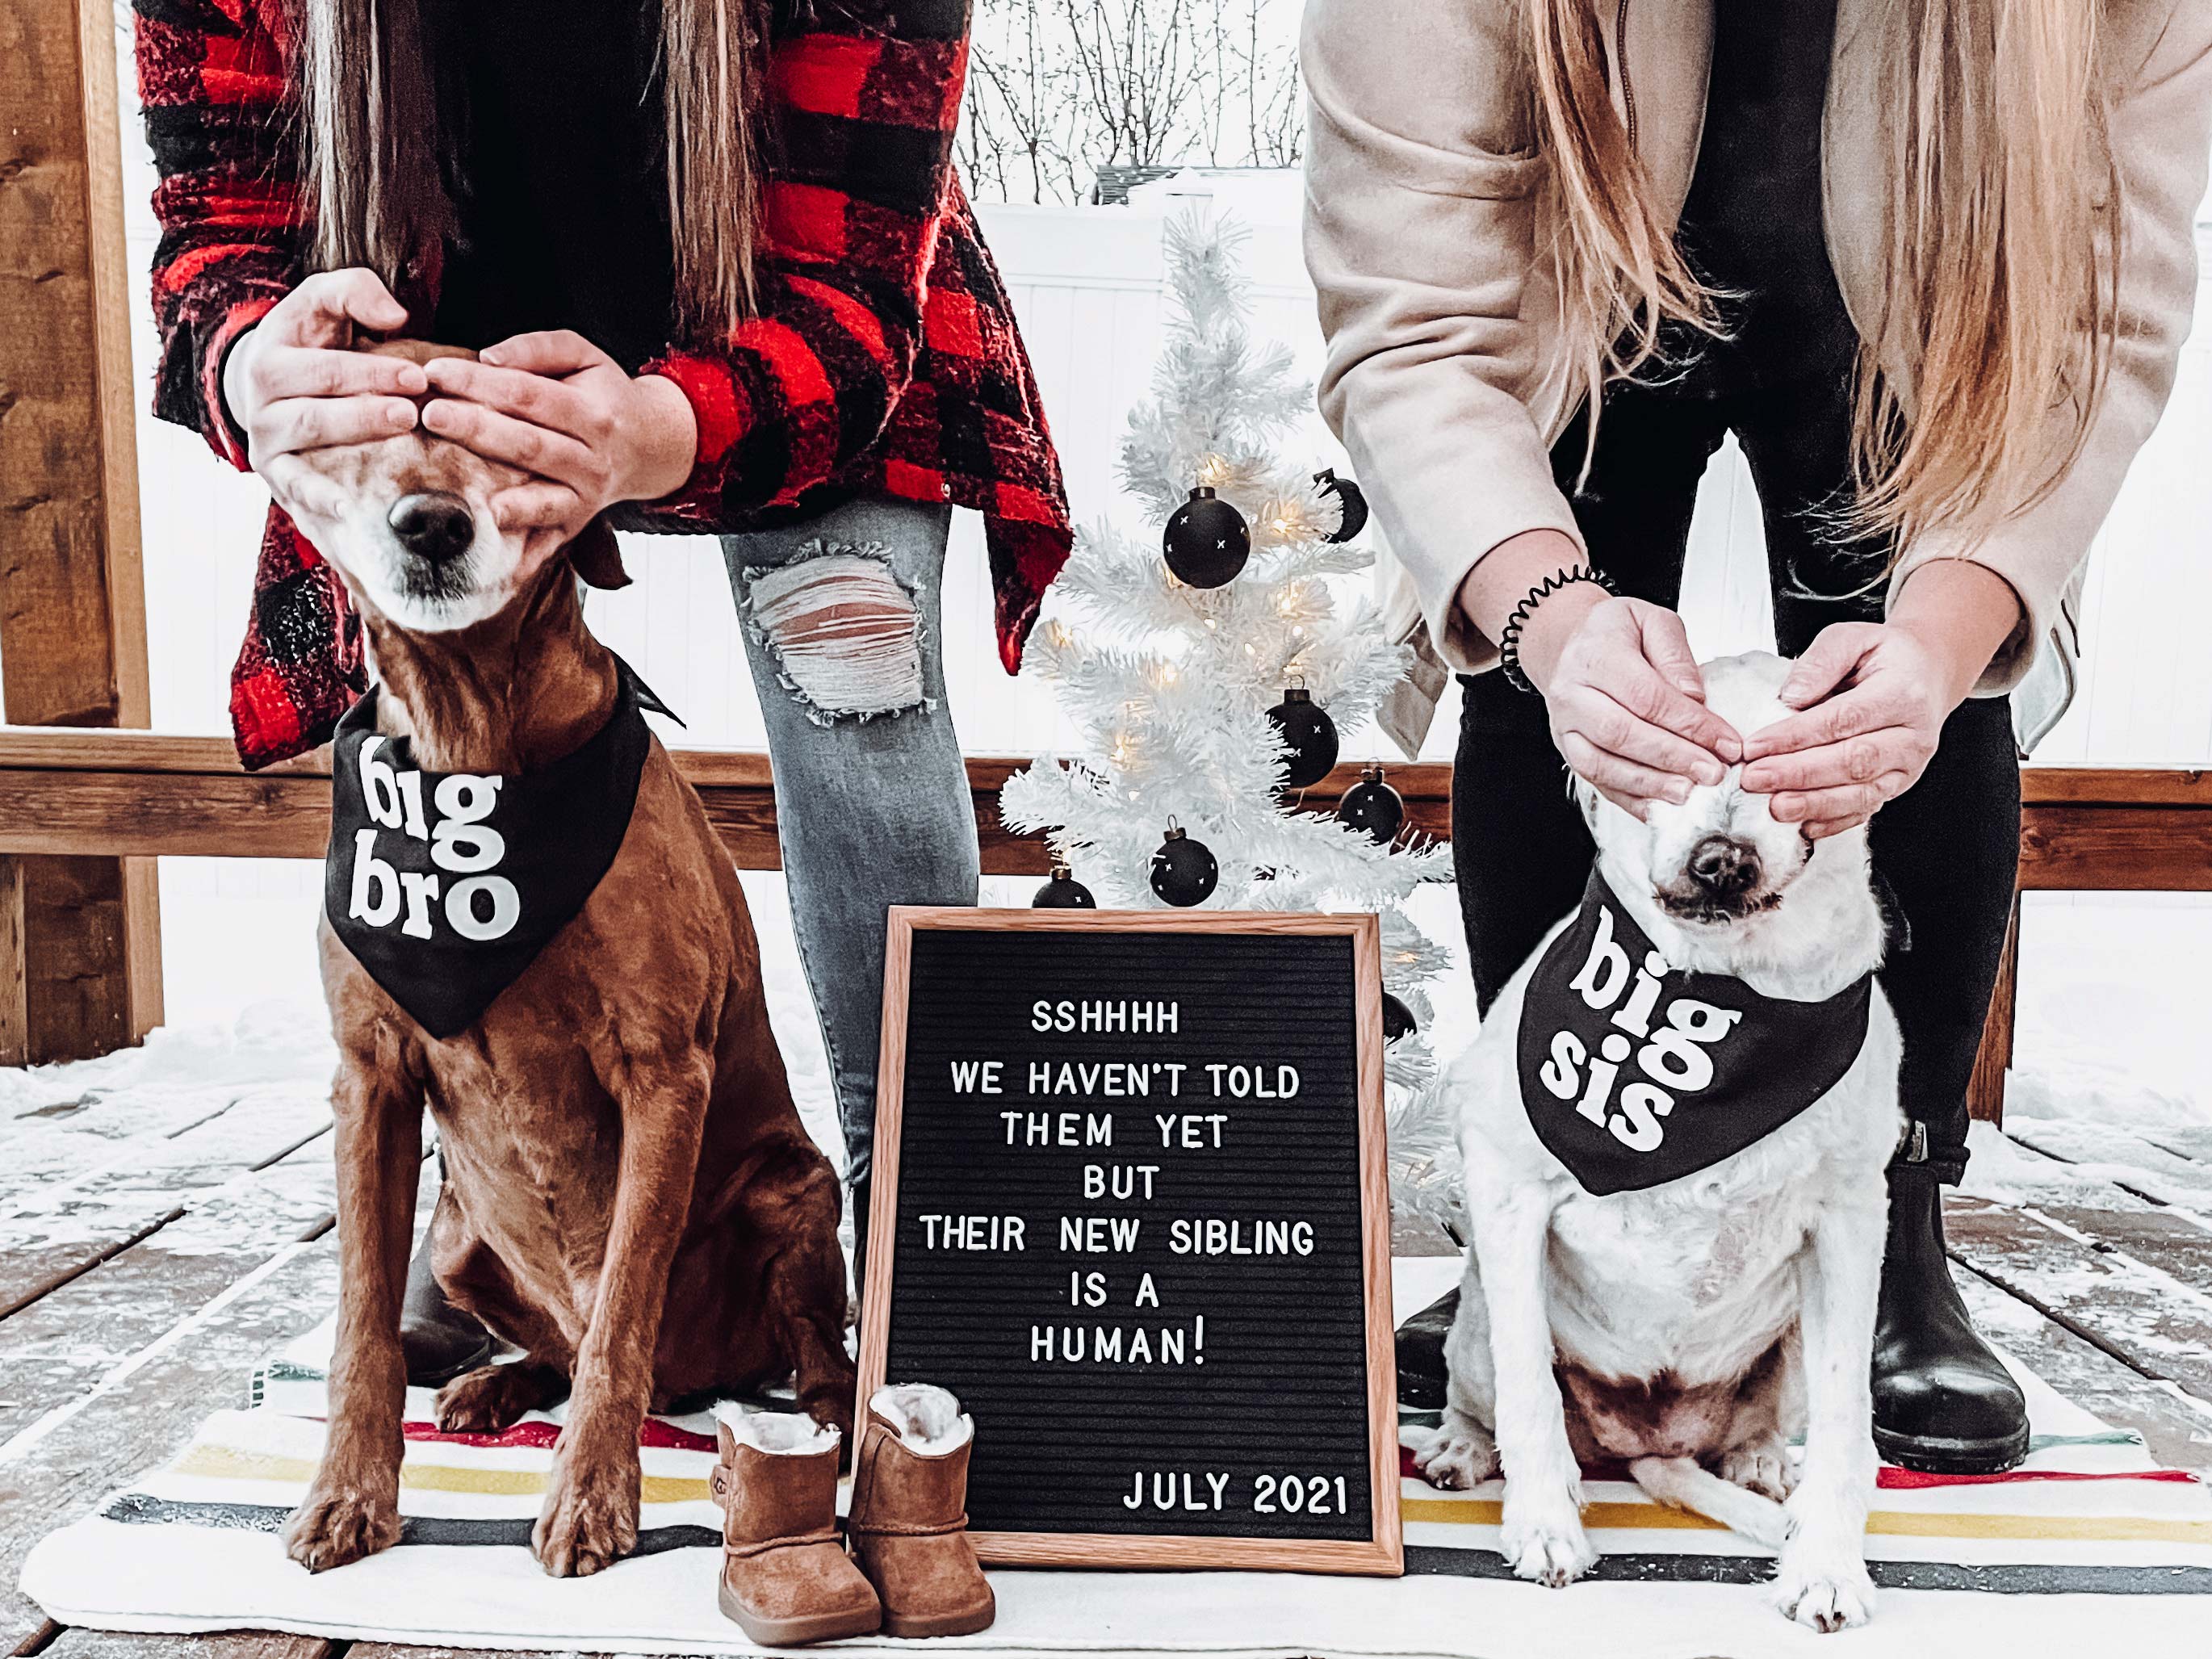 Mosie Baby pregnancy announcement with Mamas-to-be covering their dogs eyes with sign that reads "Shhh We haven'r told them yet but their new sibling is a human!"